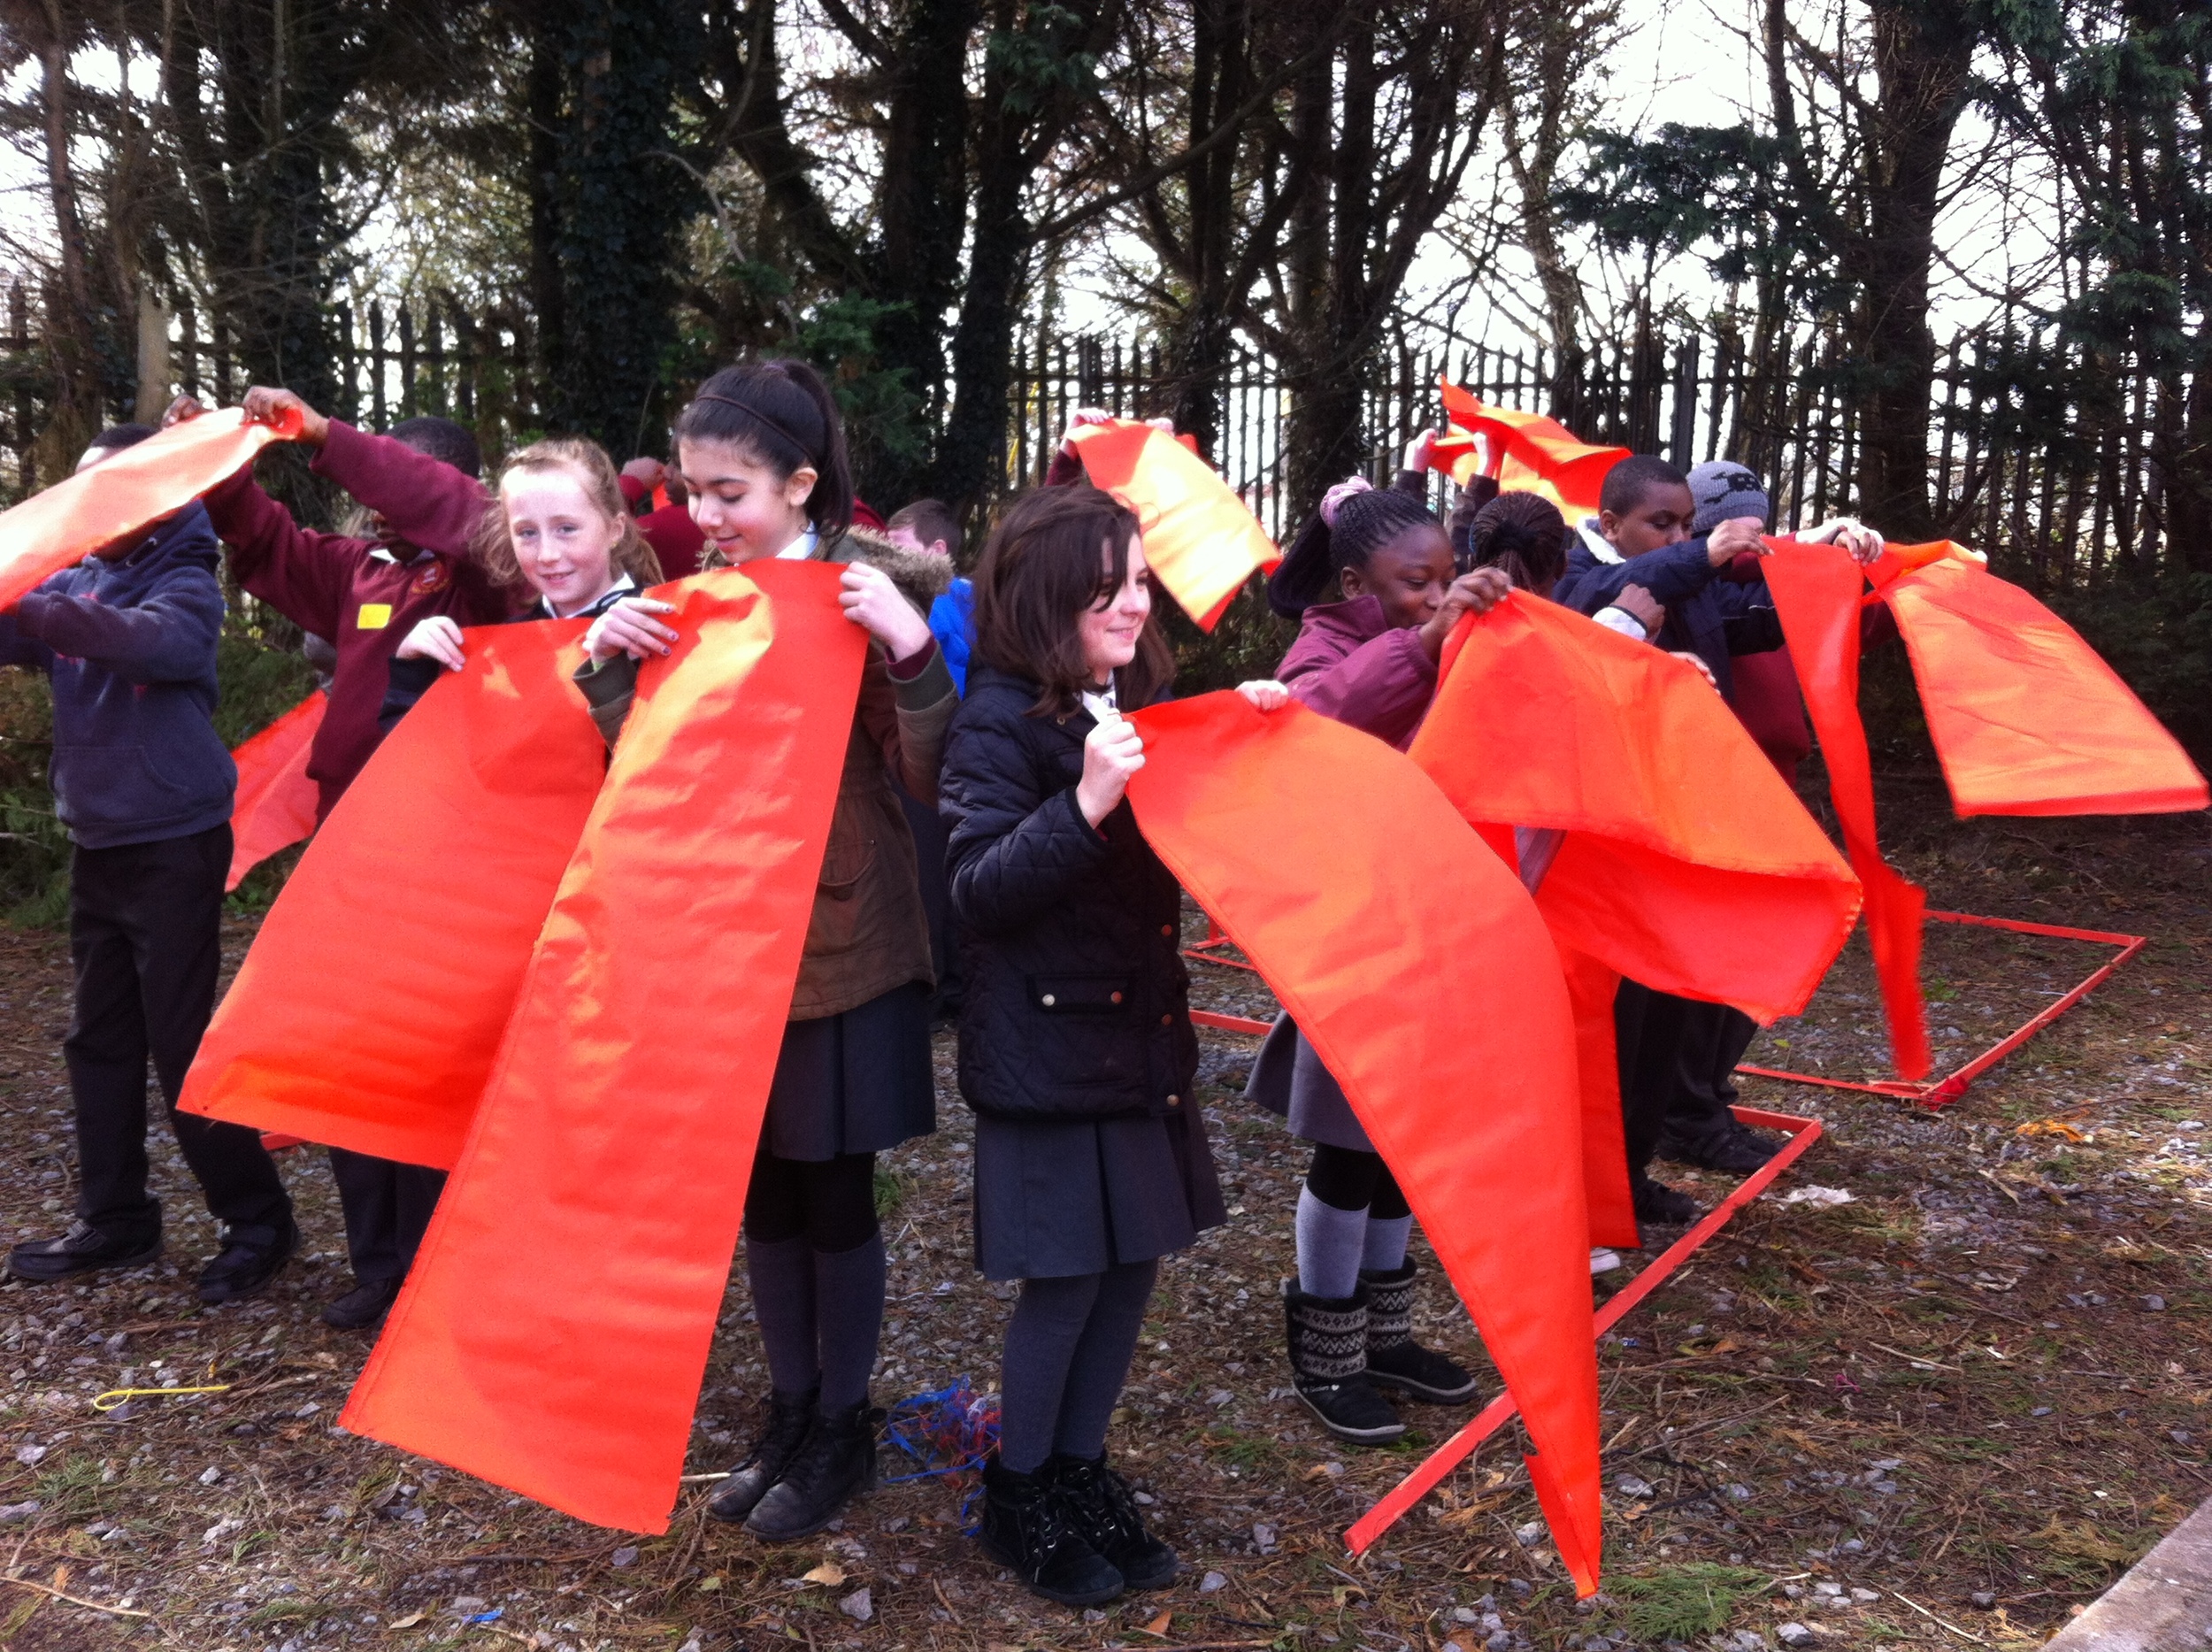  Rhona discussed art as a happening and the children collaborated on a performance work involving the sudden occurrence of ‘orange'.&nbsp;&nbsp;    